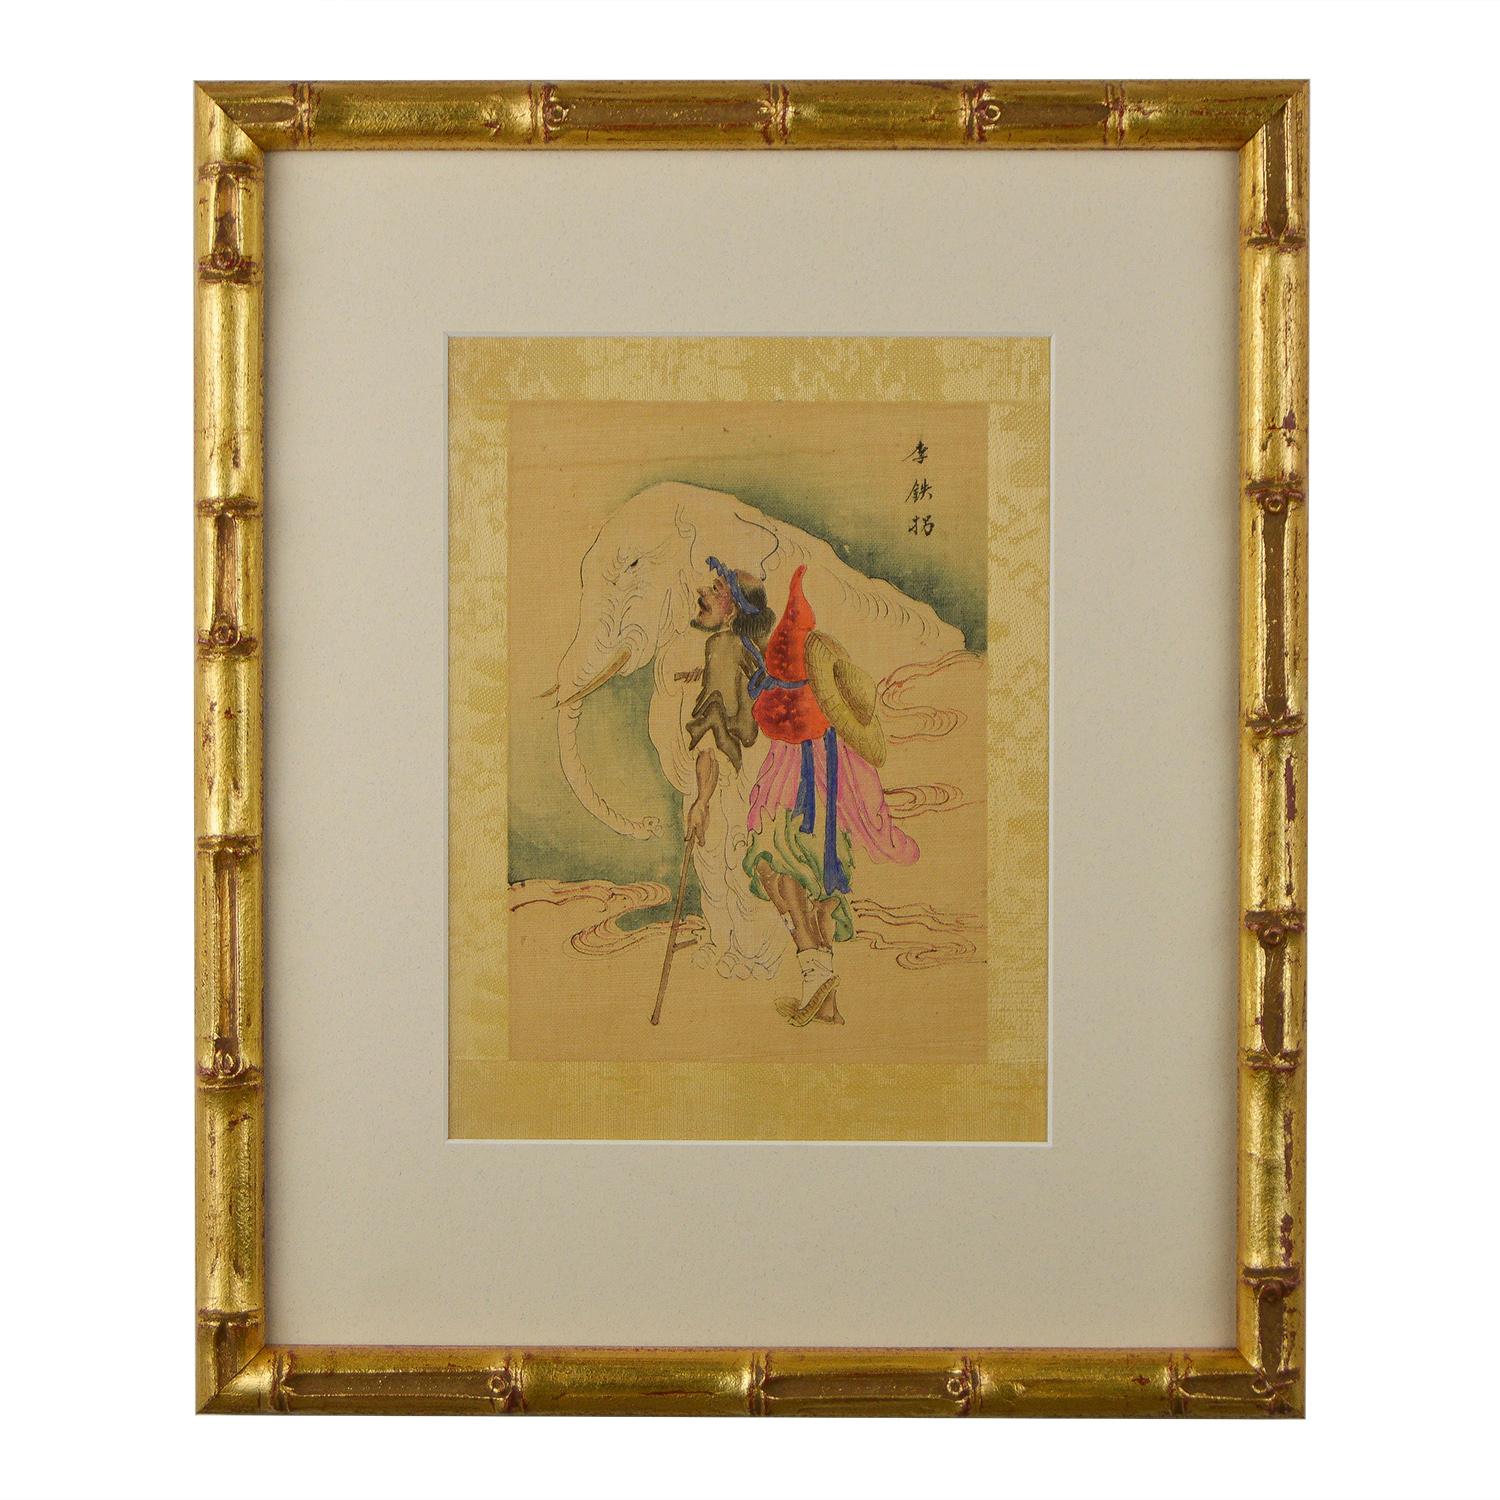 Paper Set of Ten Watercolours of the Chinese Immortals